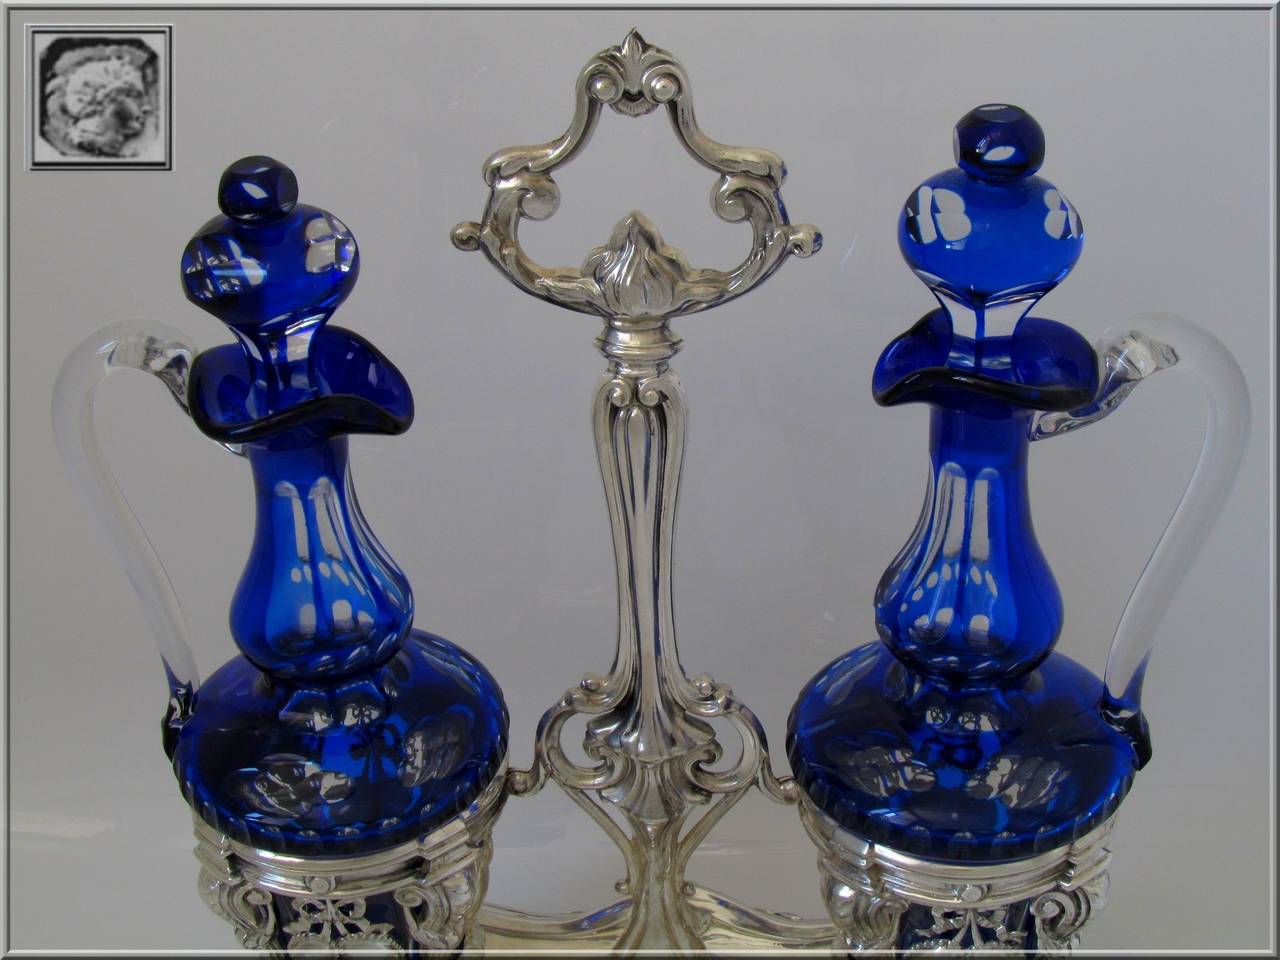 Imposing French Sterling Silver Oil & Vinegar Cruet Set, Baccarat Cobalt Blue, Louis XVI decoration

Head of Minerve 1 st titre for 950/1000 French Sterling Silver guarantee

Imposing measure :
12